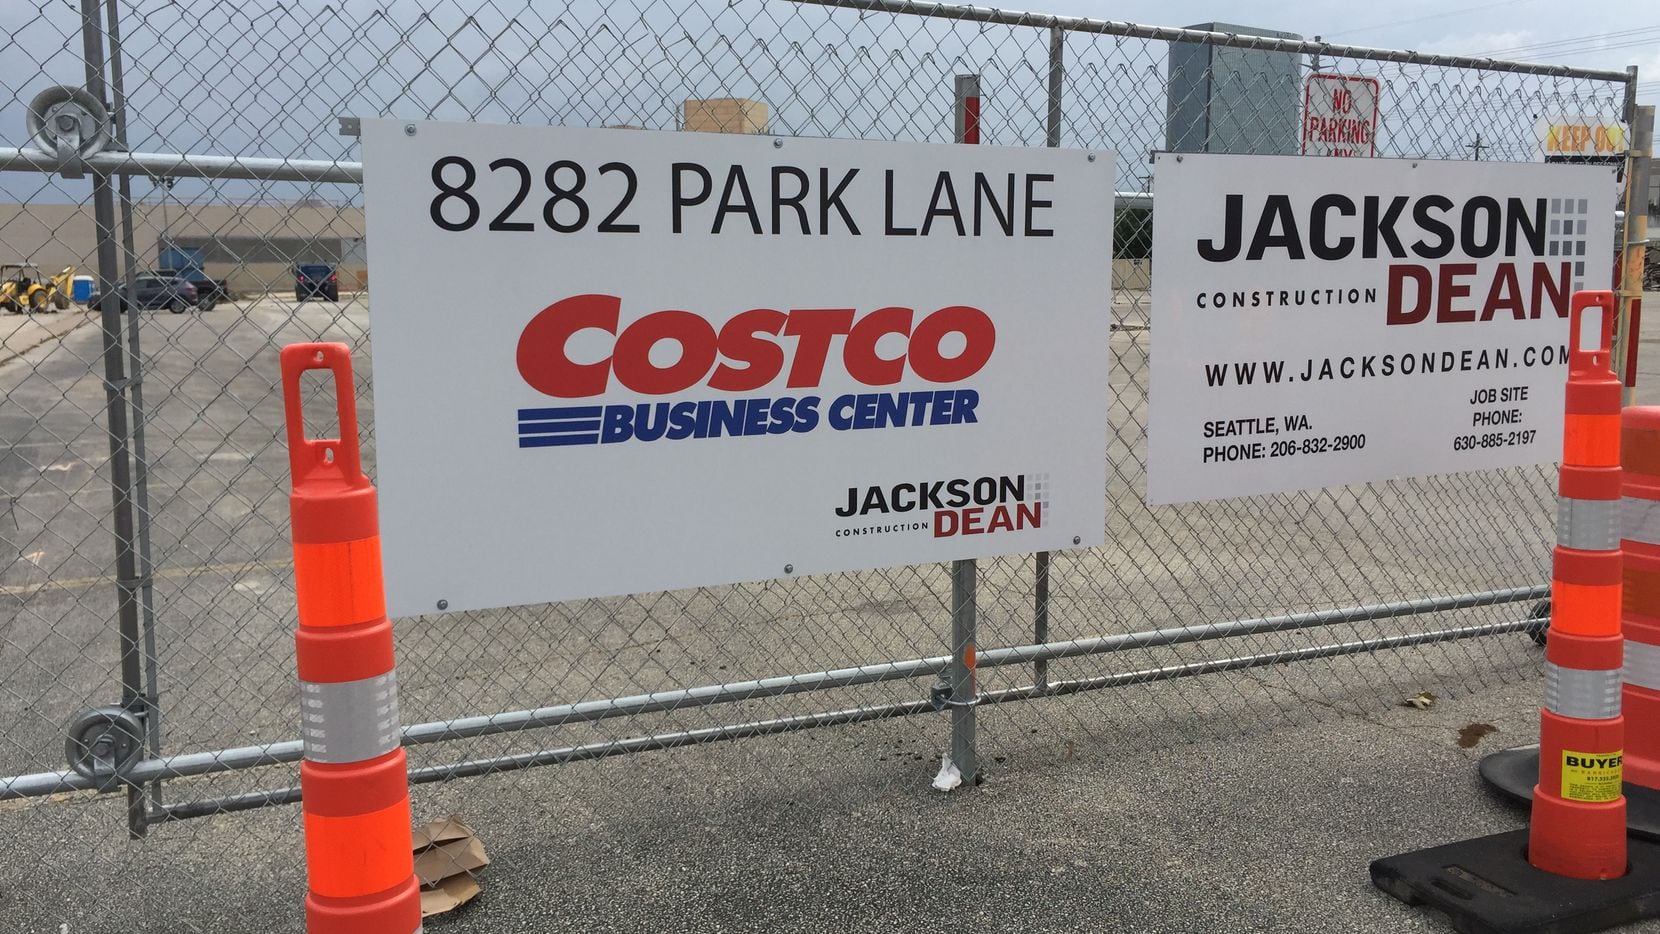 Costco Business Center has a focus of serving other businesses, but anyone with a Coscto membership can shop there. 